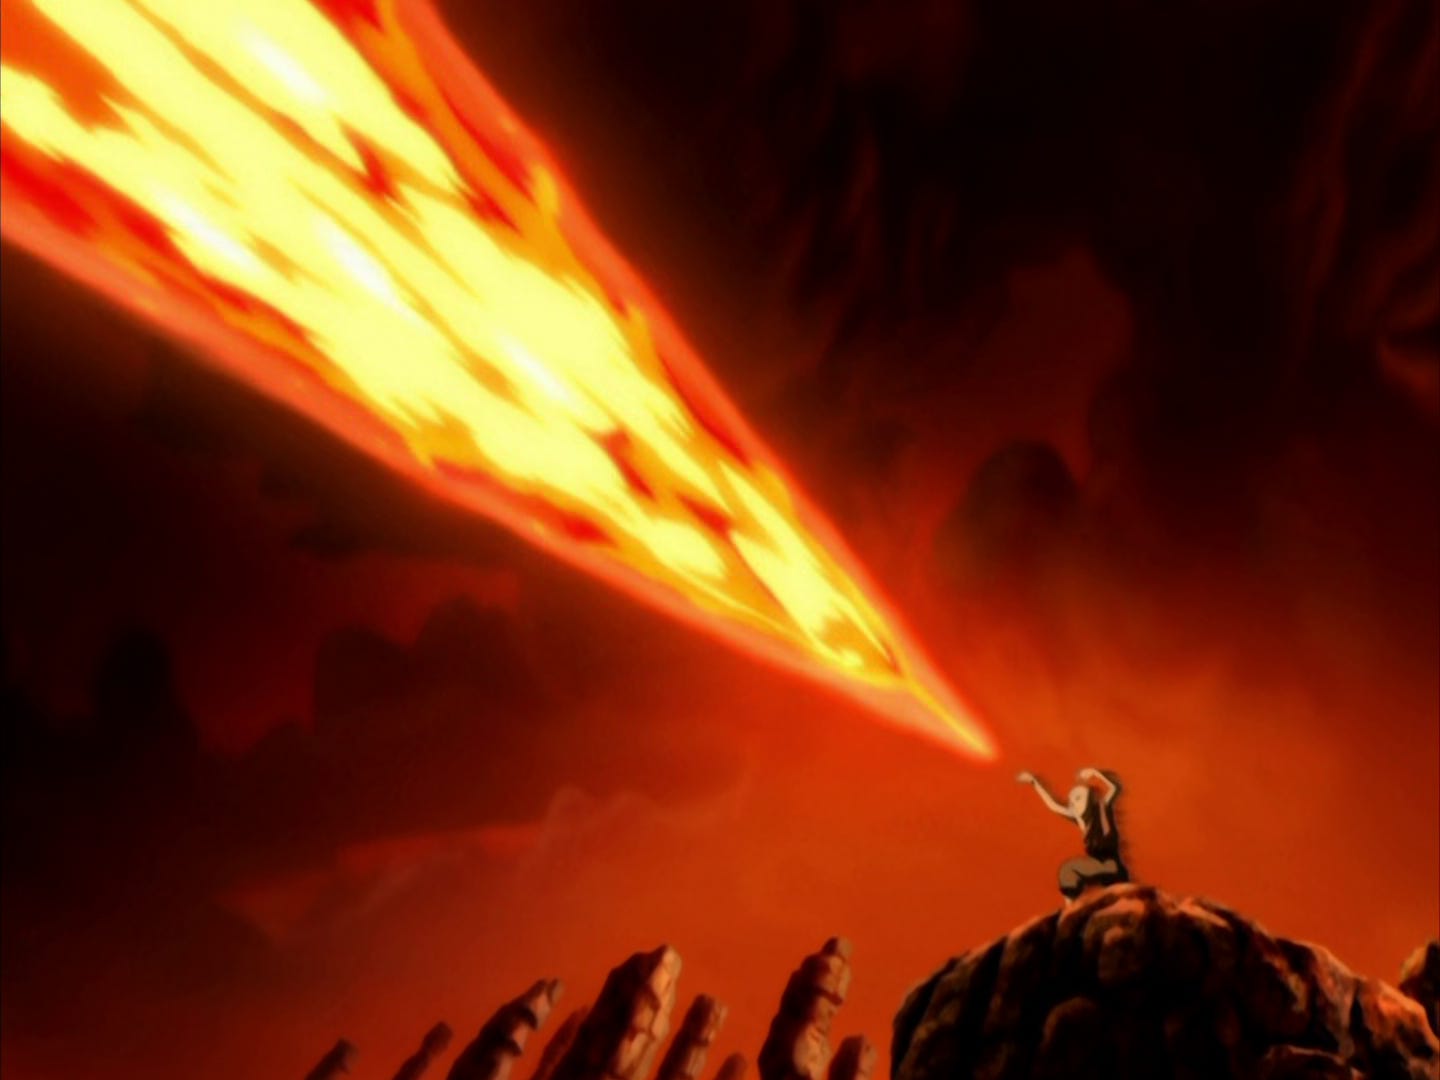 The sky reddened by Sozin's Comet, Aang perches on a clifftop and shoots a massive blast of fire upwards.